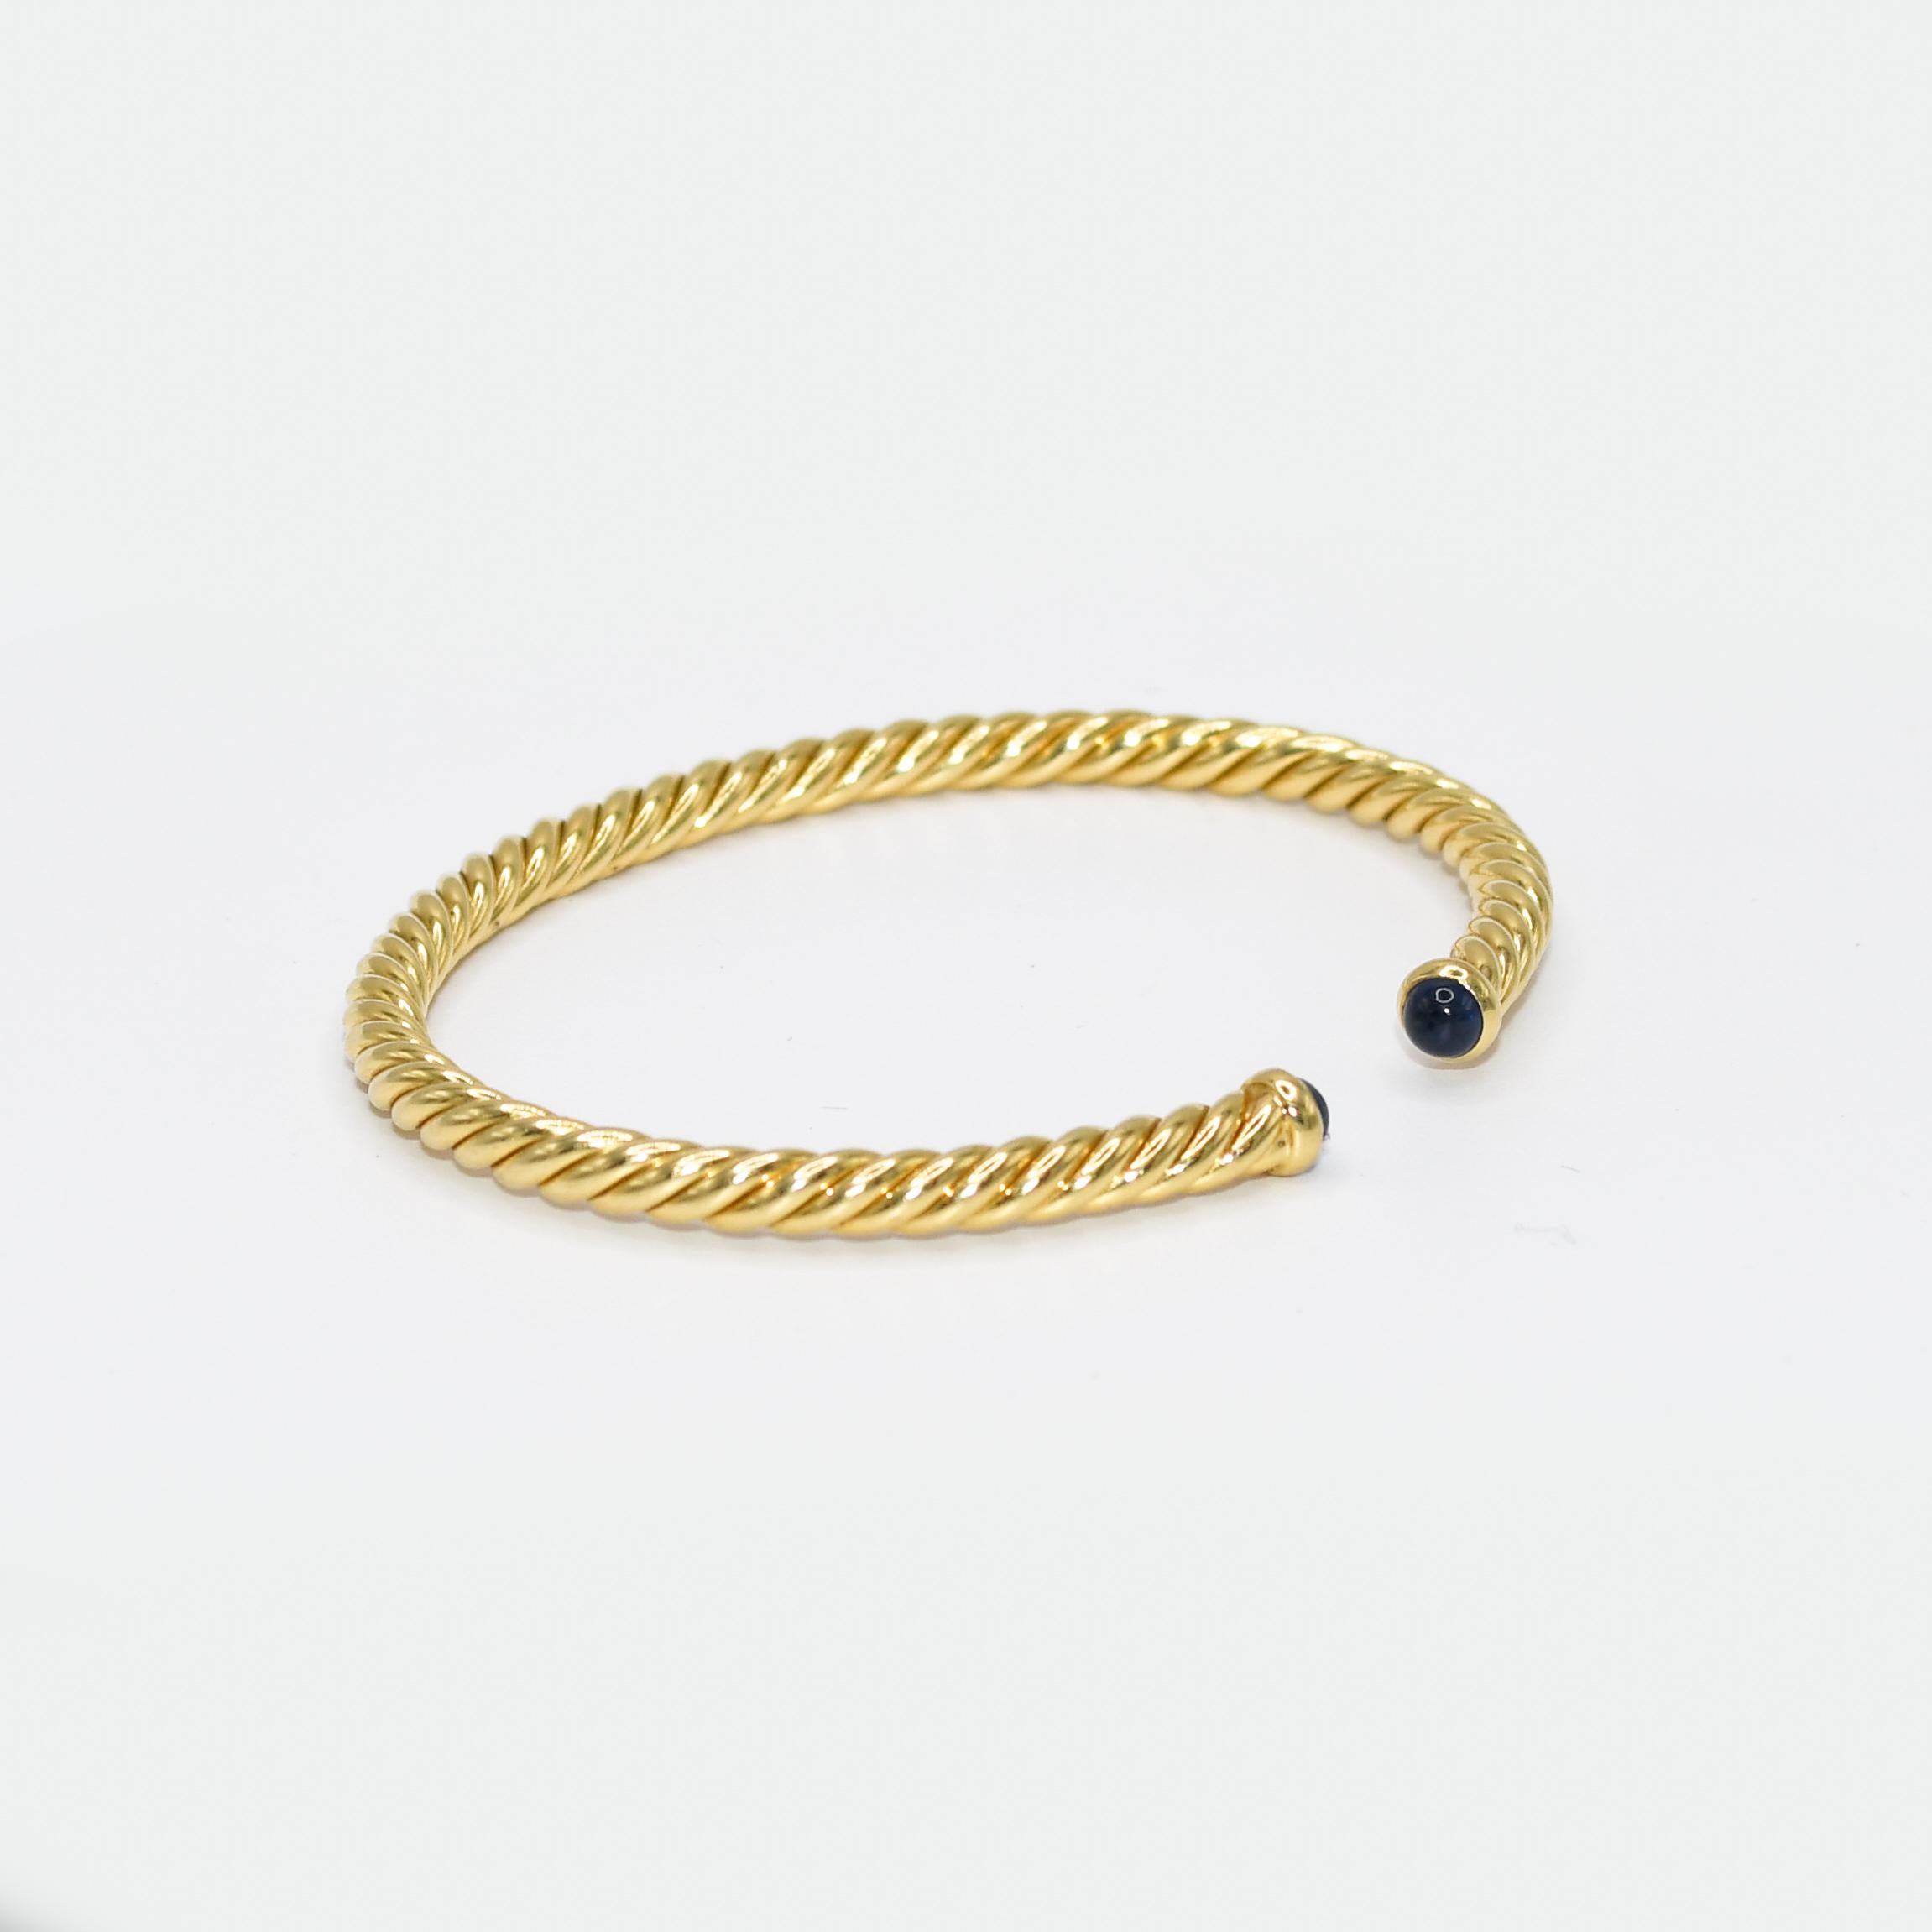 18K Yellow Gold David Yurman Spira Cable Bracelet & Sapphire ,8.5g
Ladies 18k yellow gold David Yurman Spira cable bracelet.
Blue sapphire end pieces.
Stamped D.Y. 750, M and weighs 8.5 grams.
The bangle measures 4mm thick and will fit up to a 6